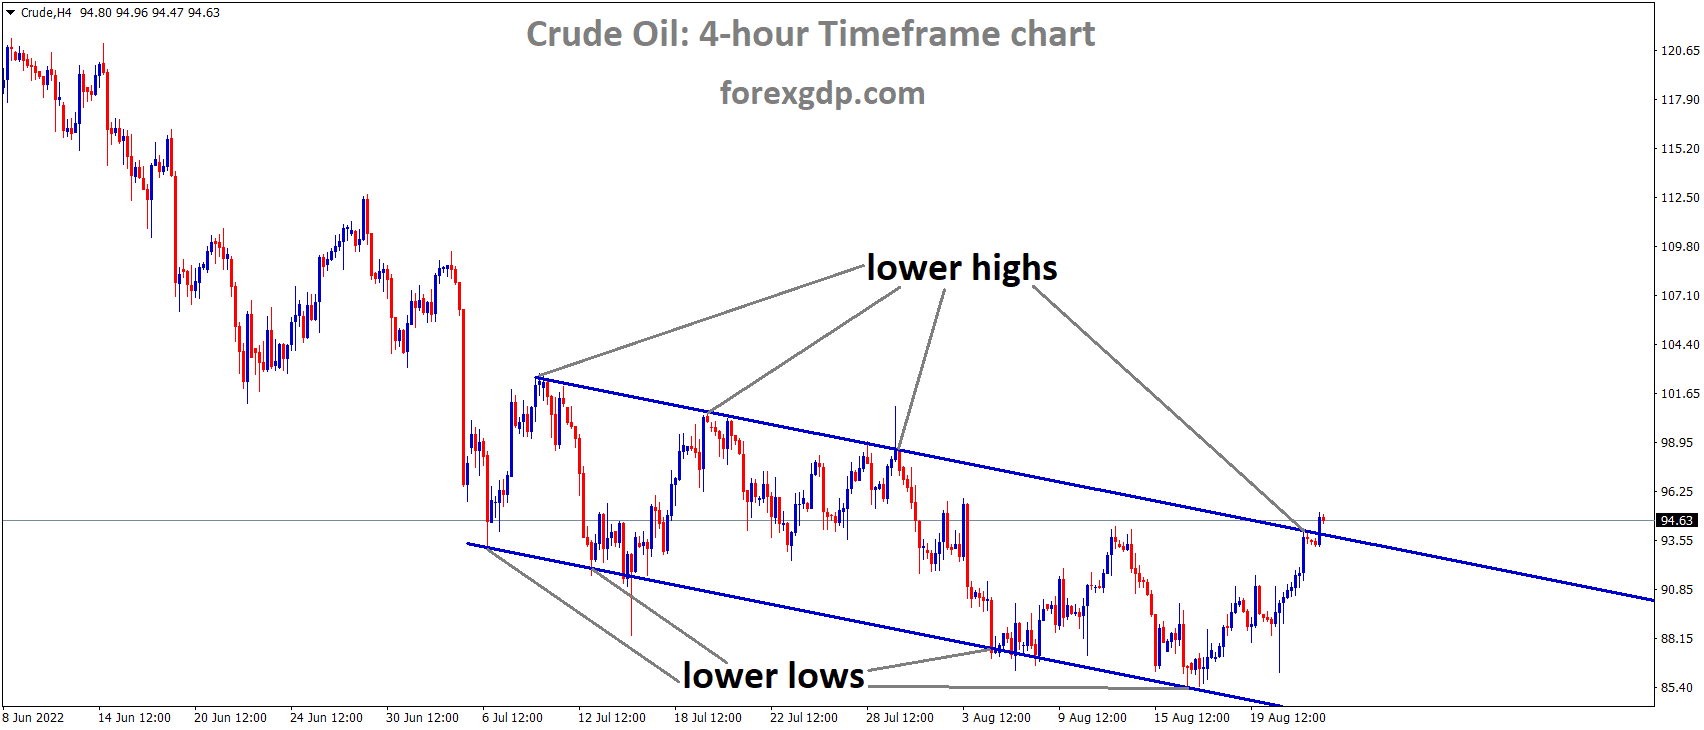 Crude Oil is moving in the Descending channel and the market has reached the lower high area of the channel 1